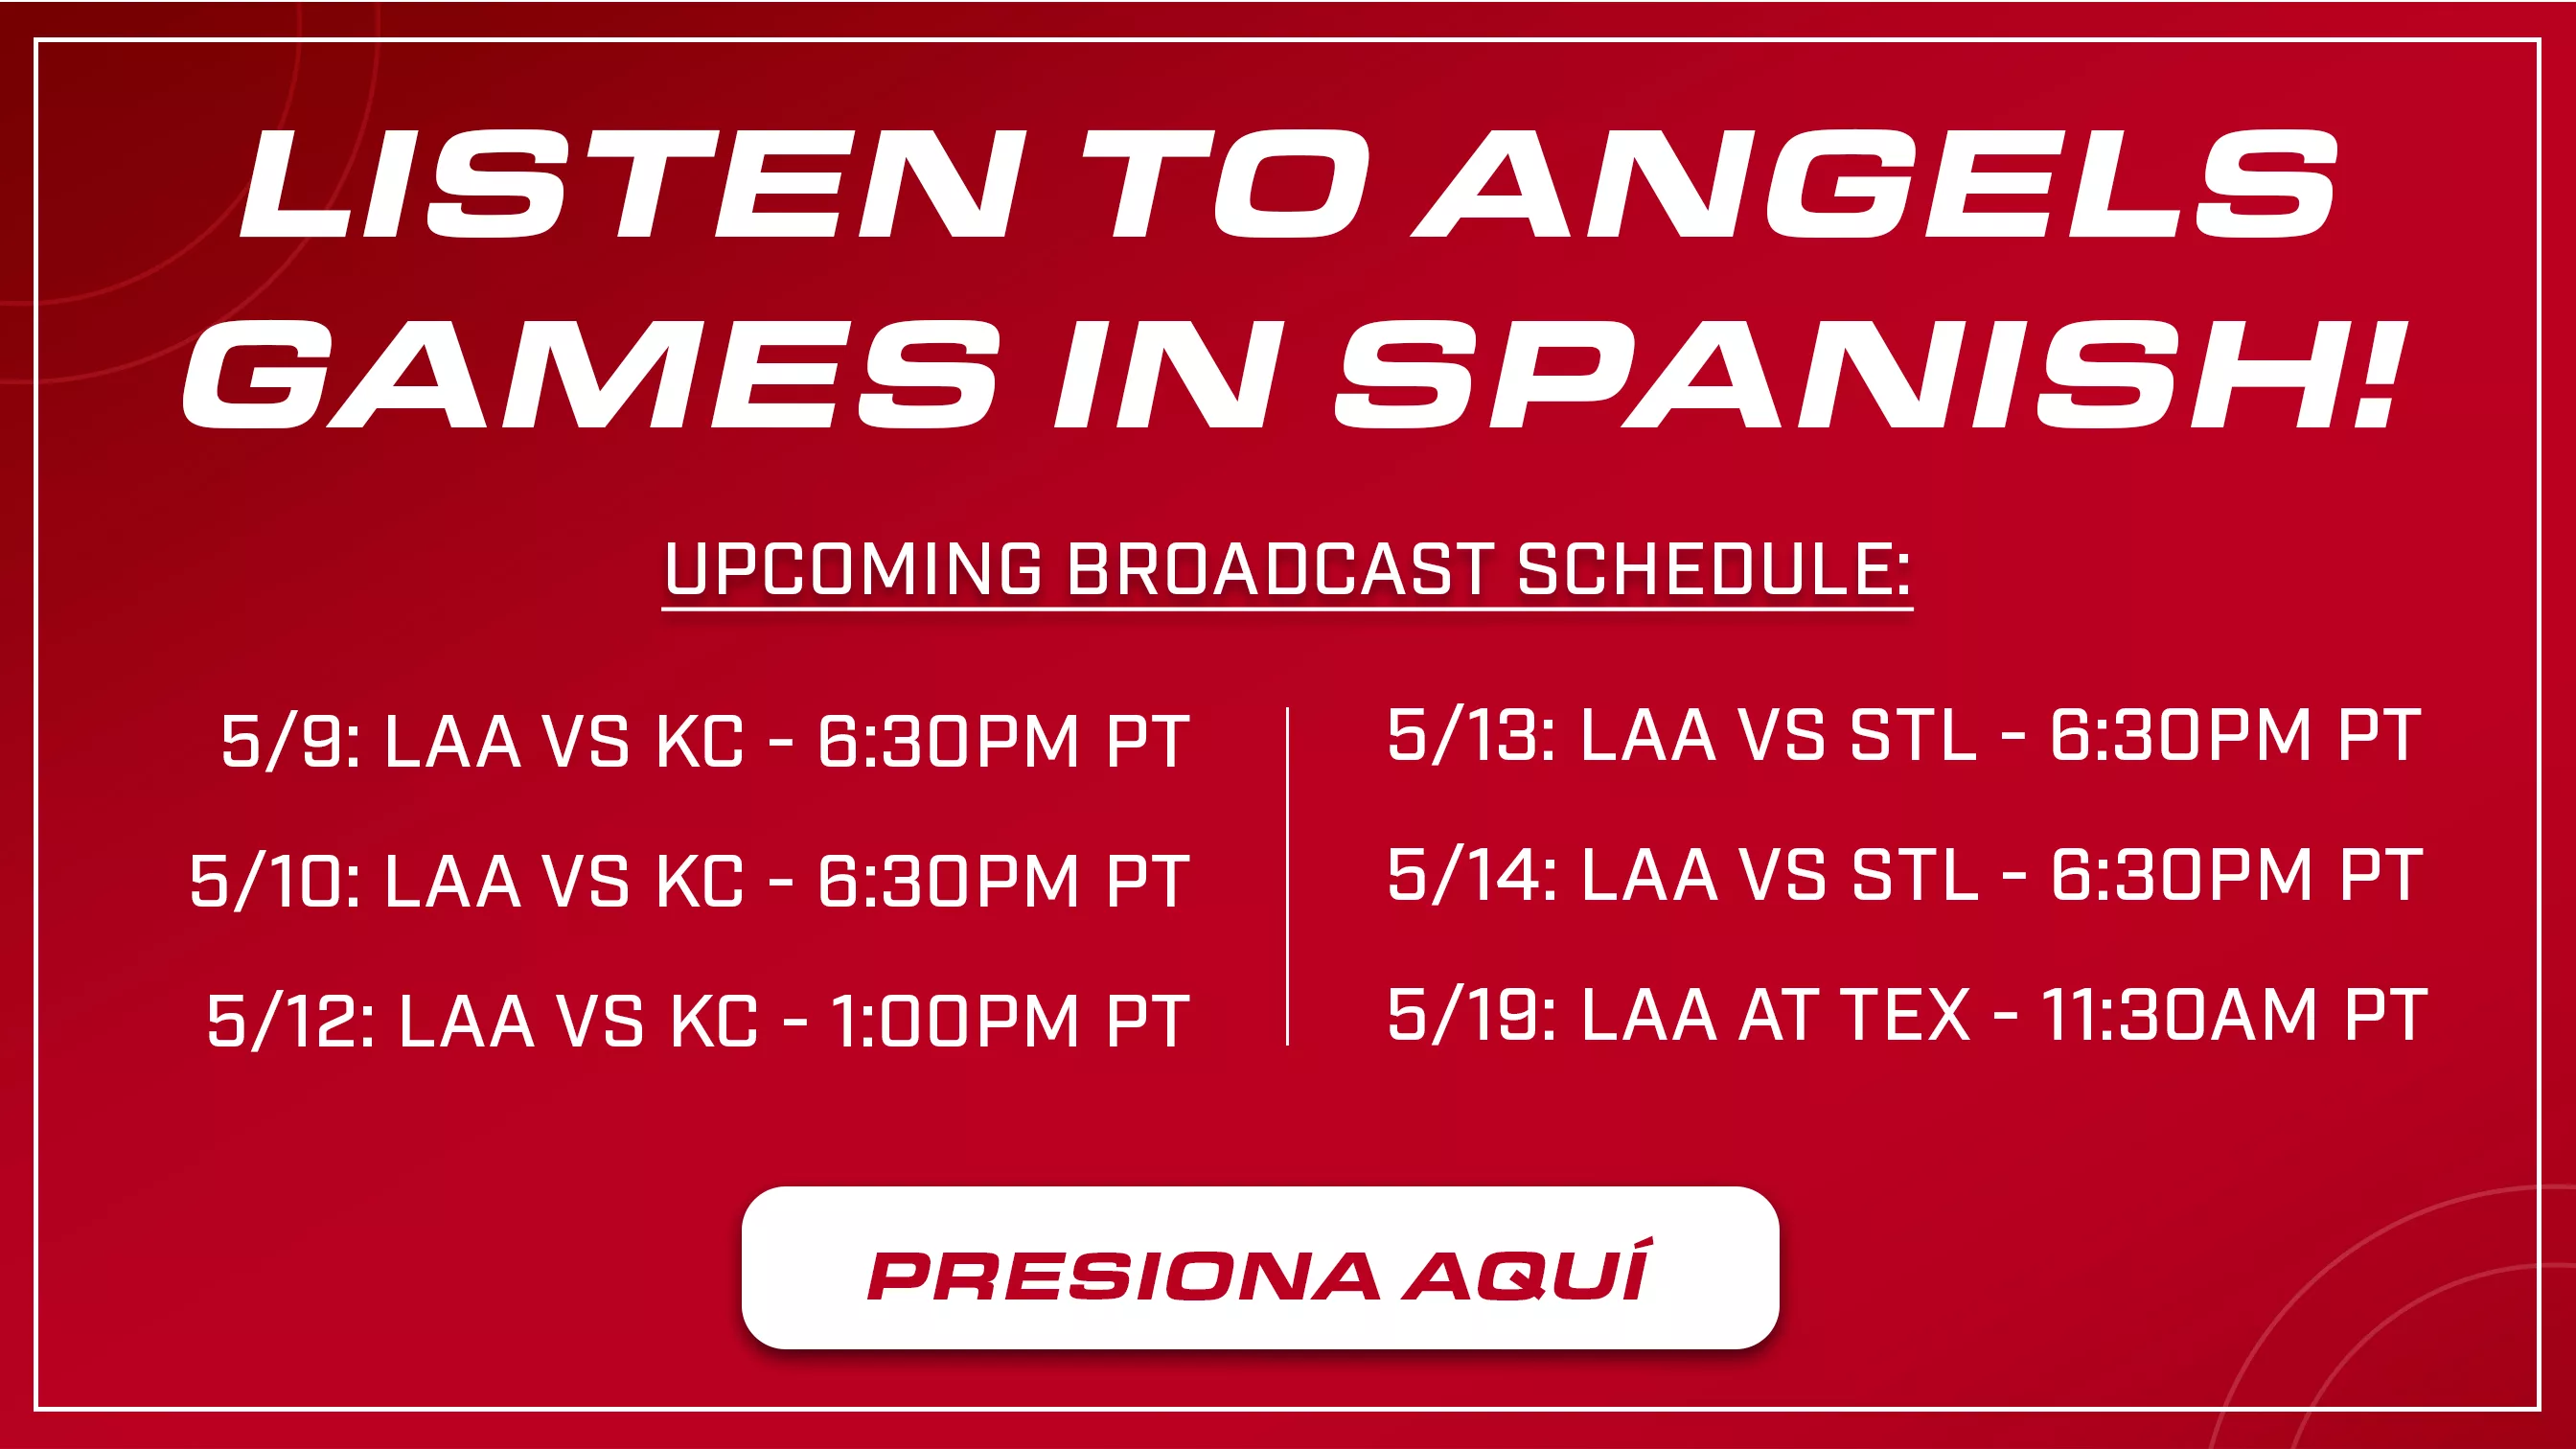 Listen to Angels Games in Spanish! Upcoming broadcast schedule - click here